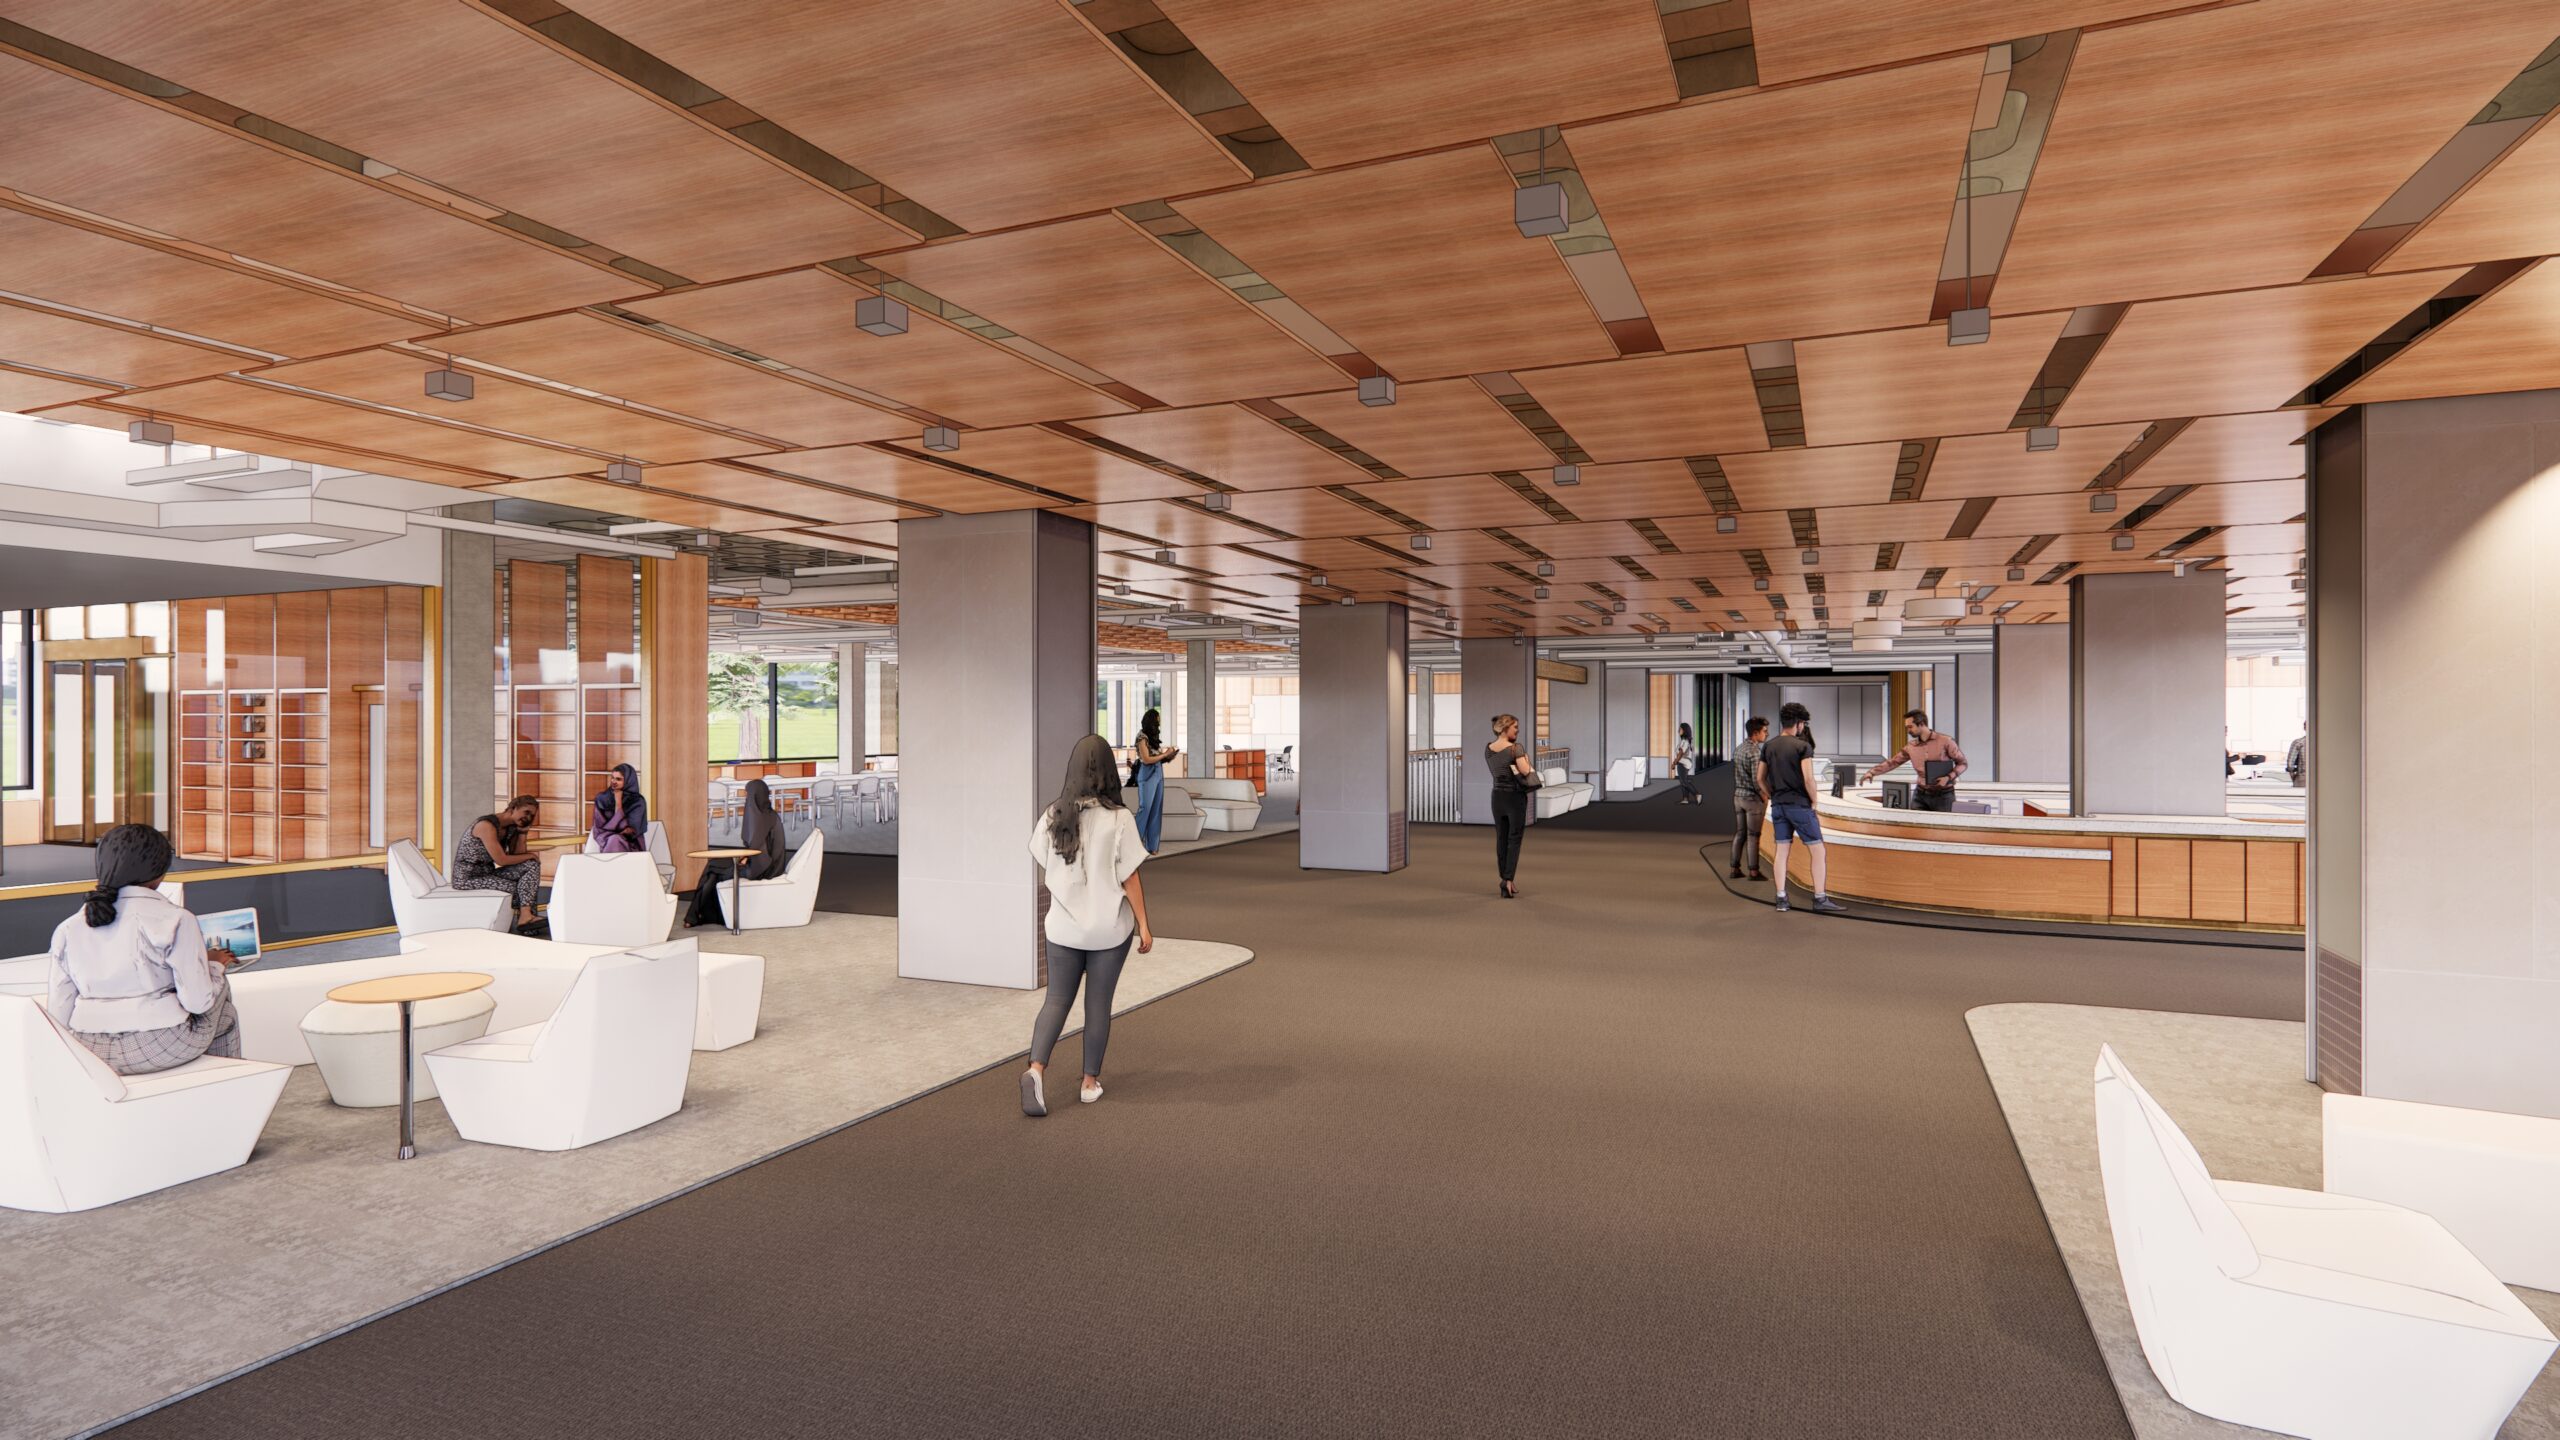 A rendering of the renovated first floor and new service point in Olin Library, seen from the main entrance, by architectural firm Goody Clancy.